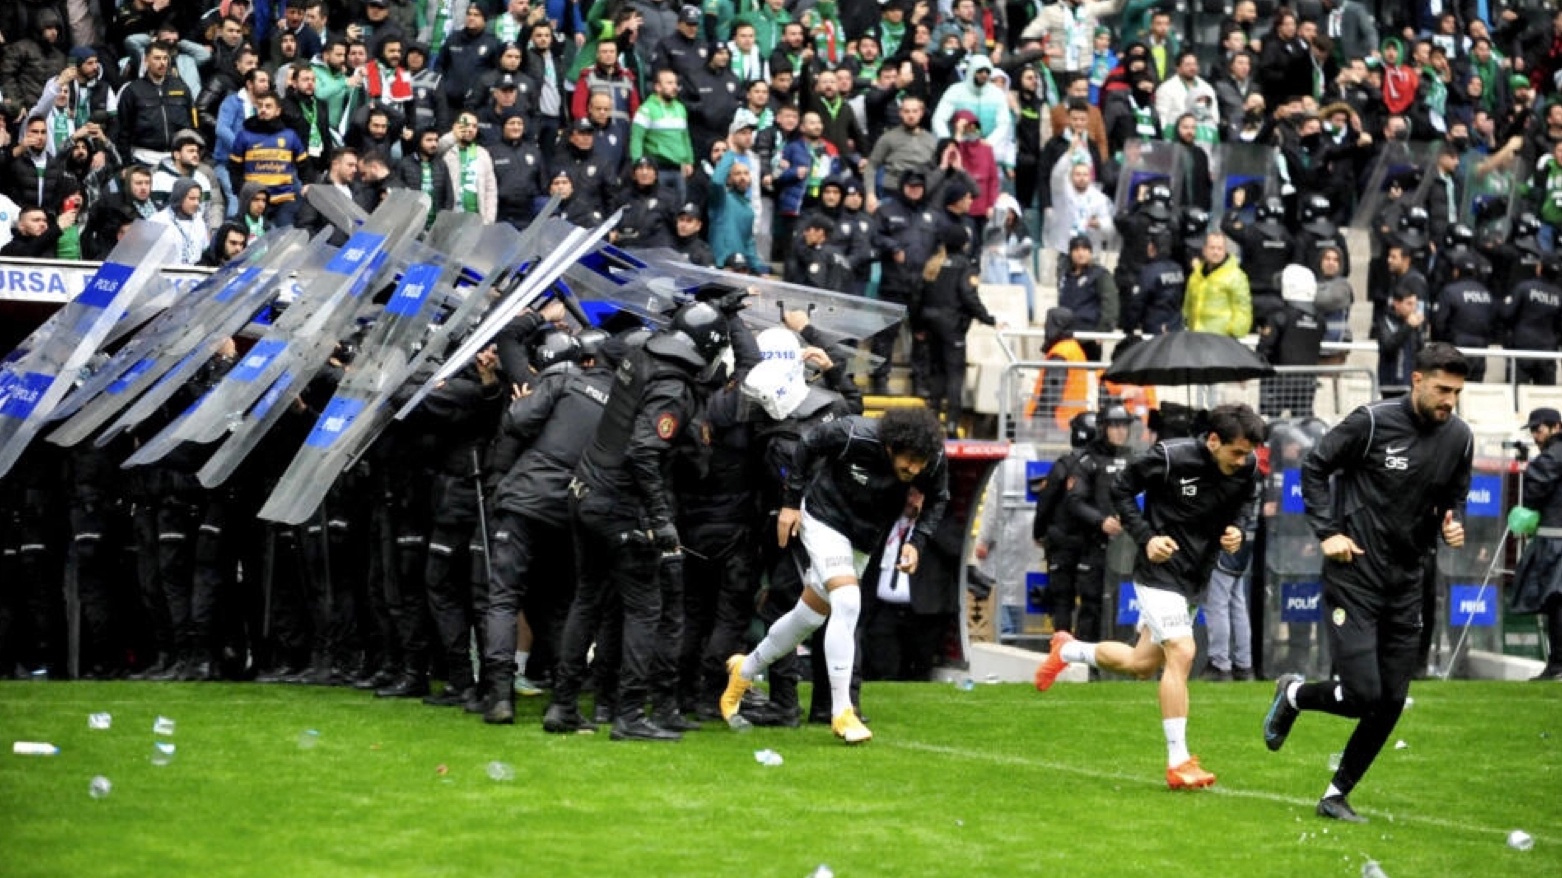 Bursaspor players clashed with another team from Turkey's Kurdish southeast in March (Photo: AFP)